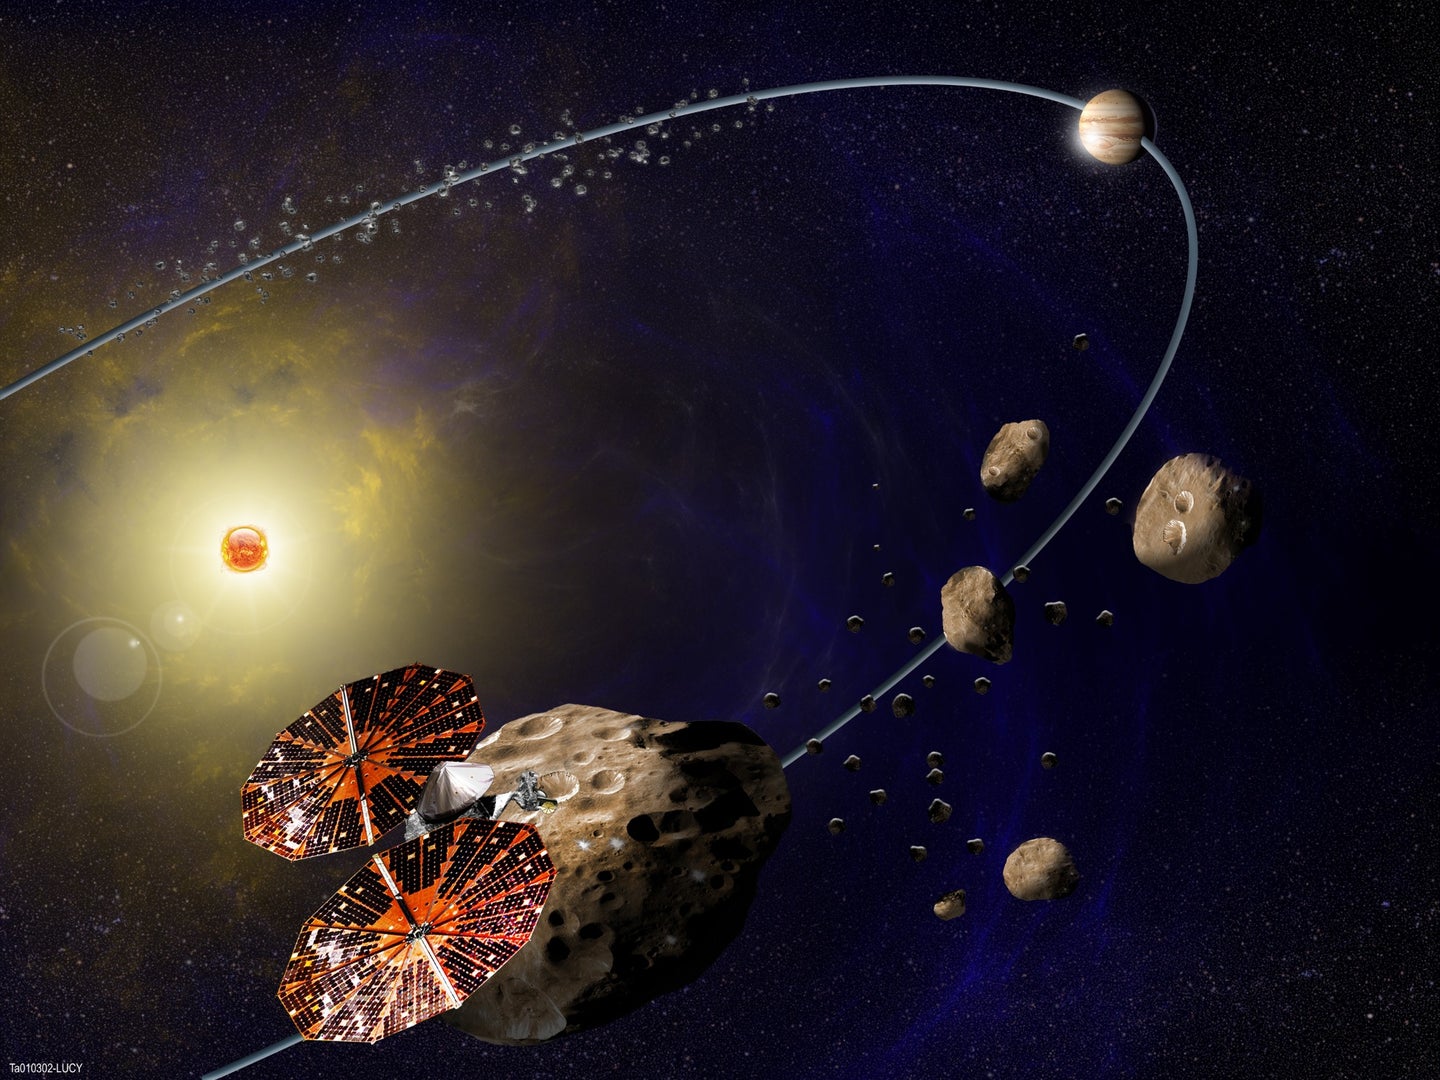 NASA asteroid probe Lucy flying through the solar system's asteroid belt in illustration